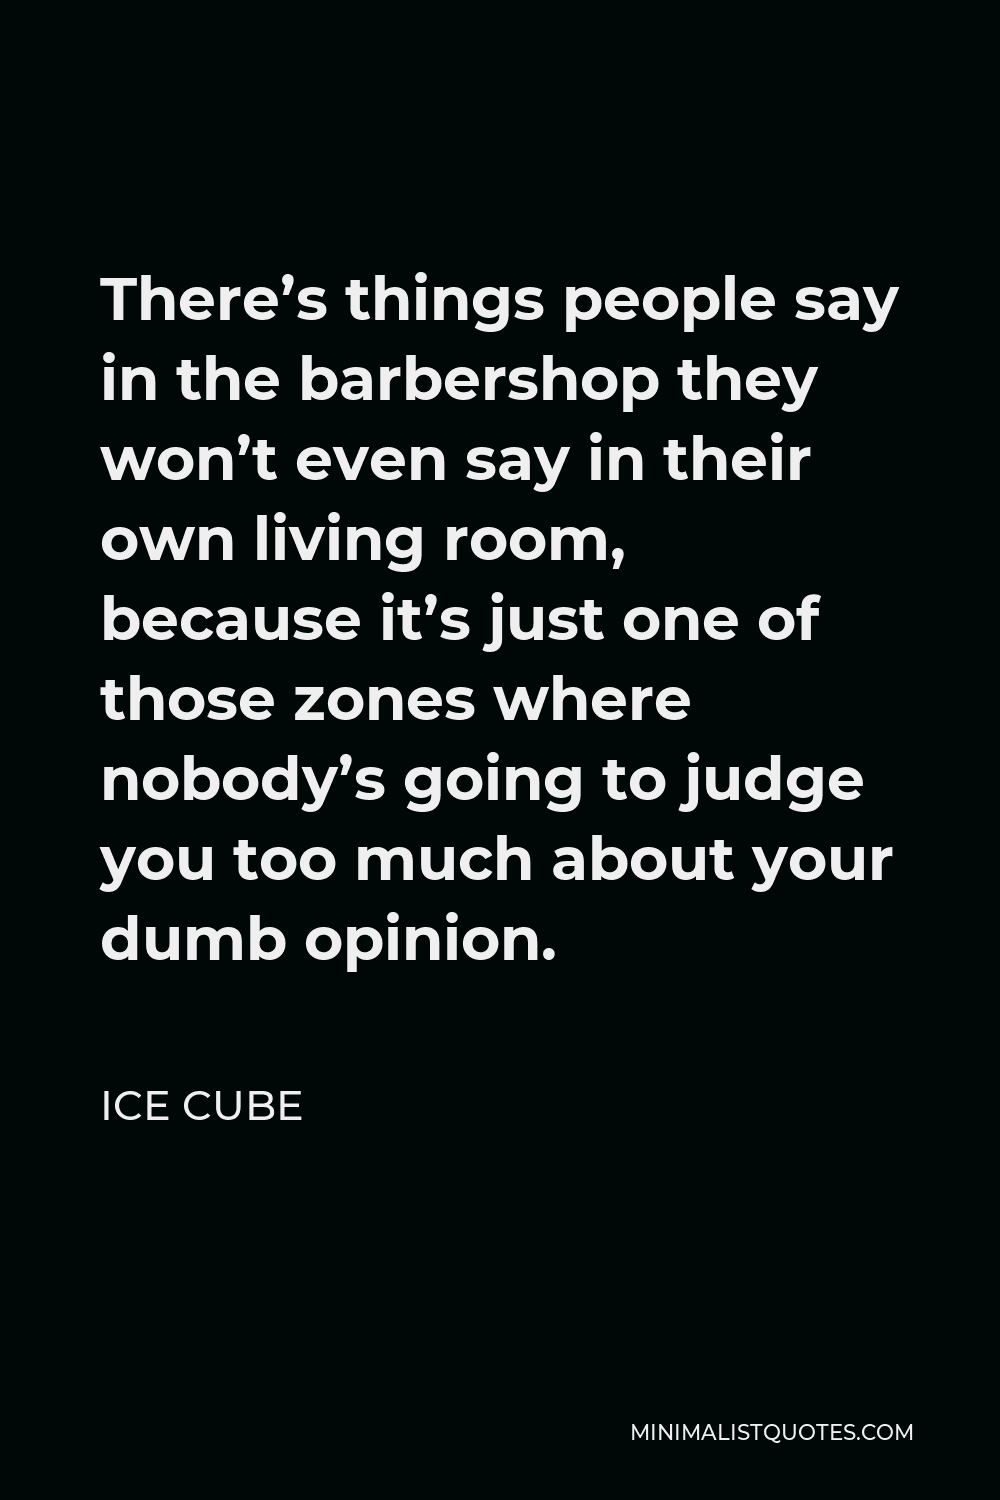 Ice Cube Quote - There’s things people say in the barbershop they won’t even say in their own living room, because it’s just one of those zones where nobody’s going to judge you too much about your dumb opinion.